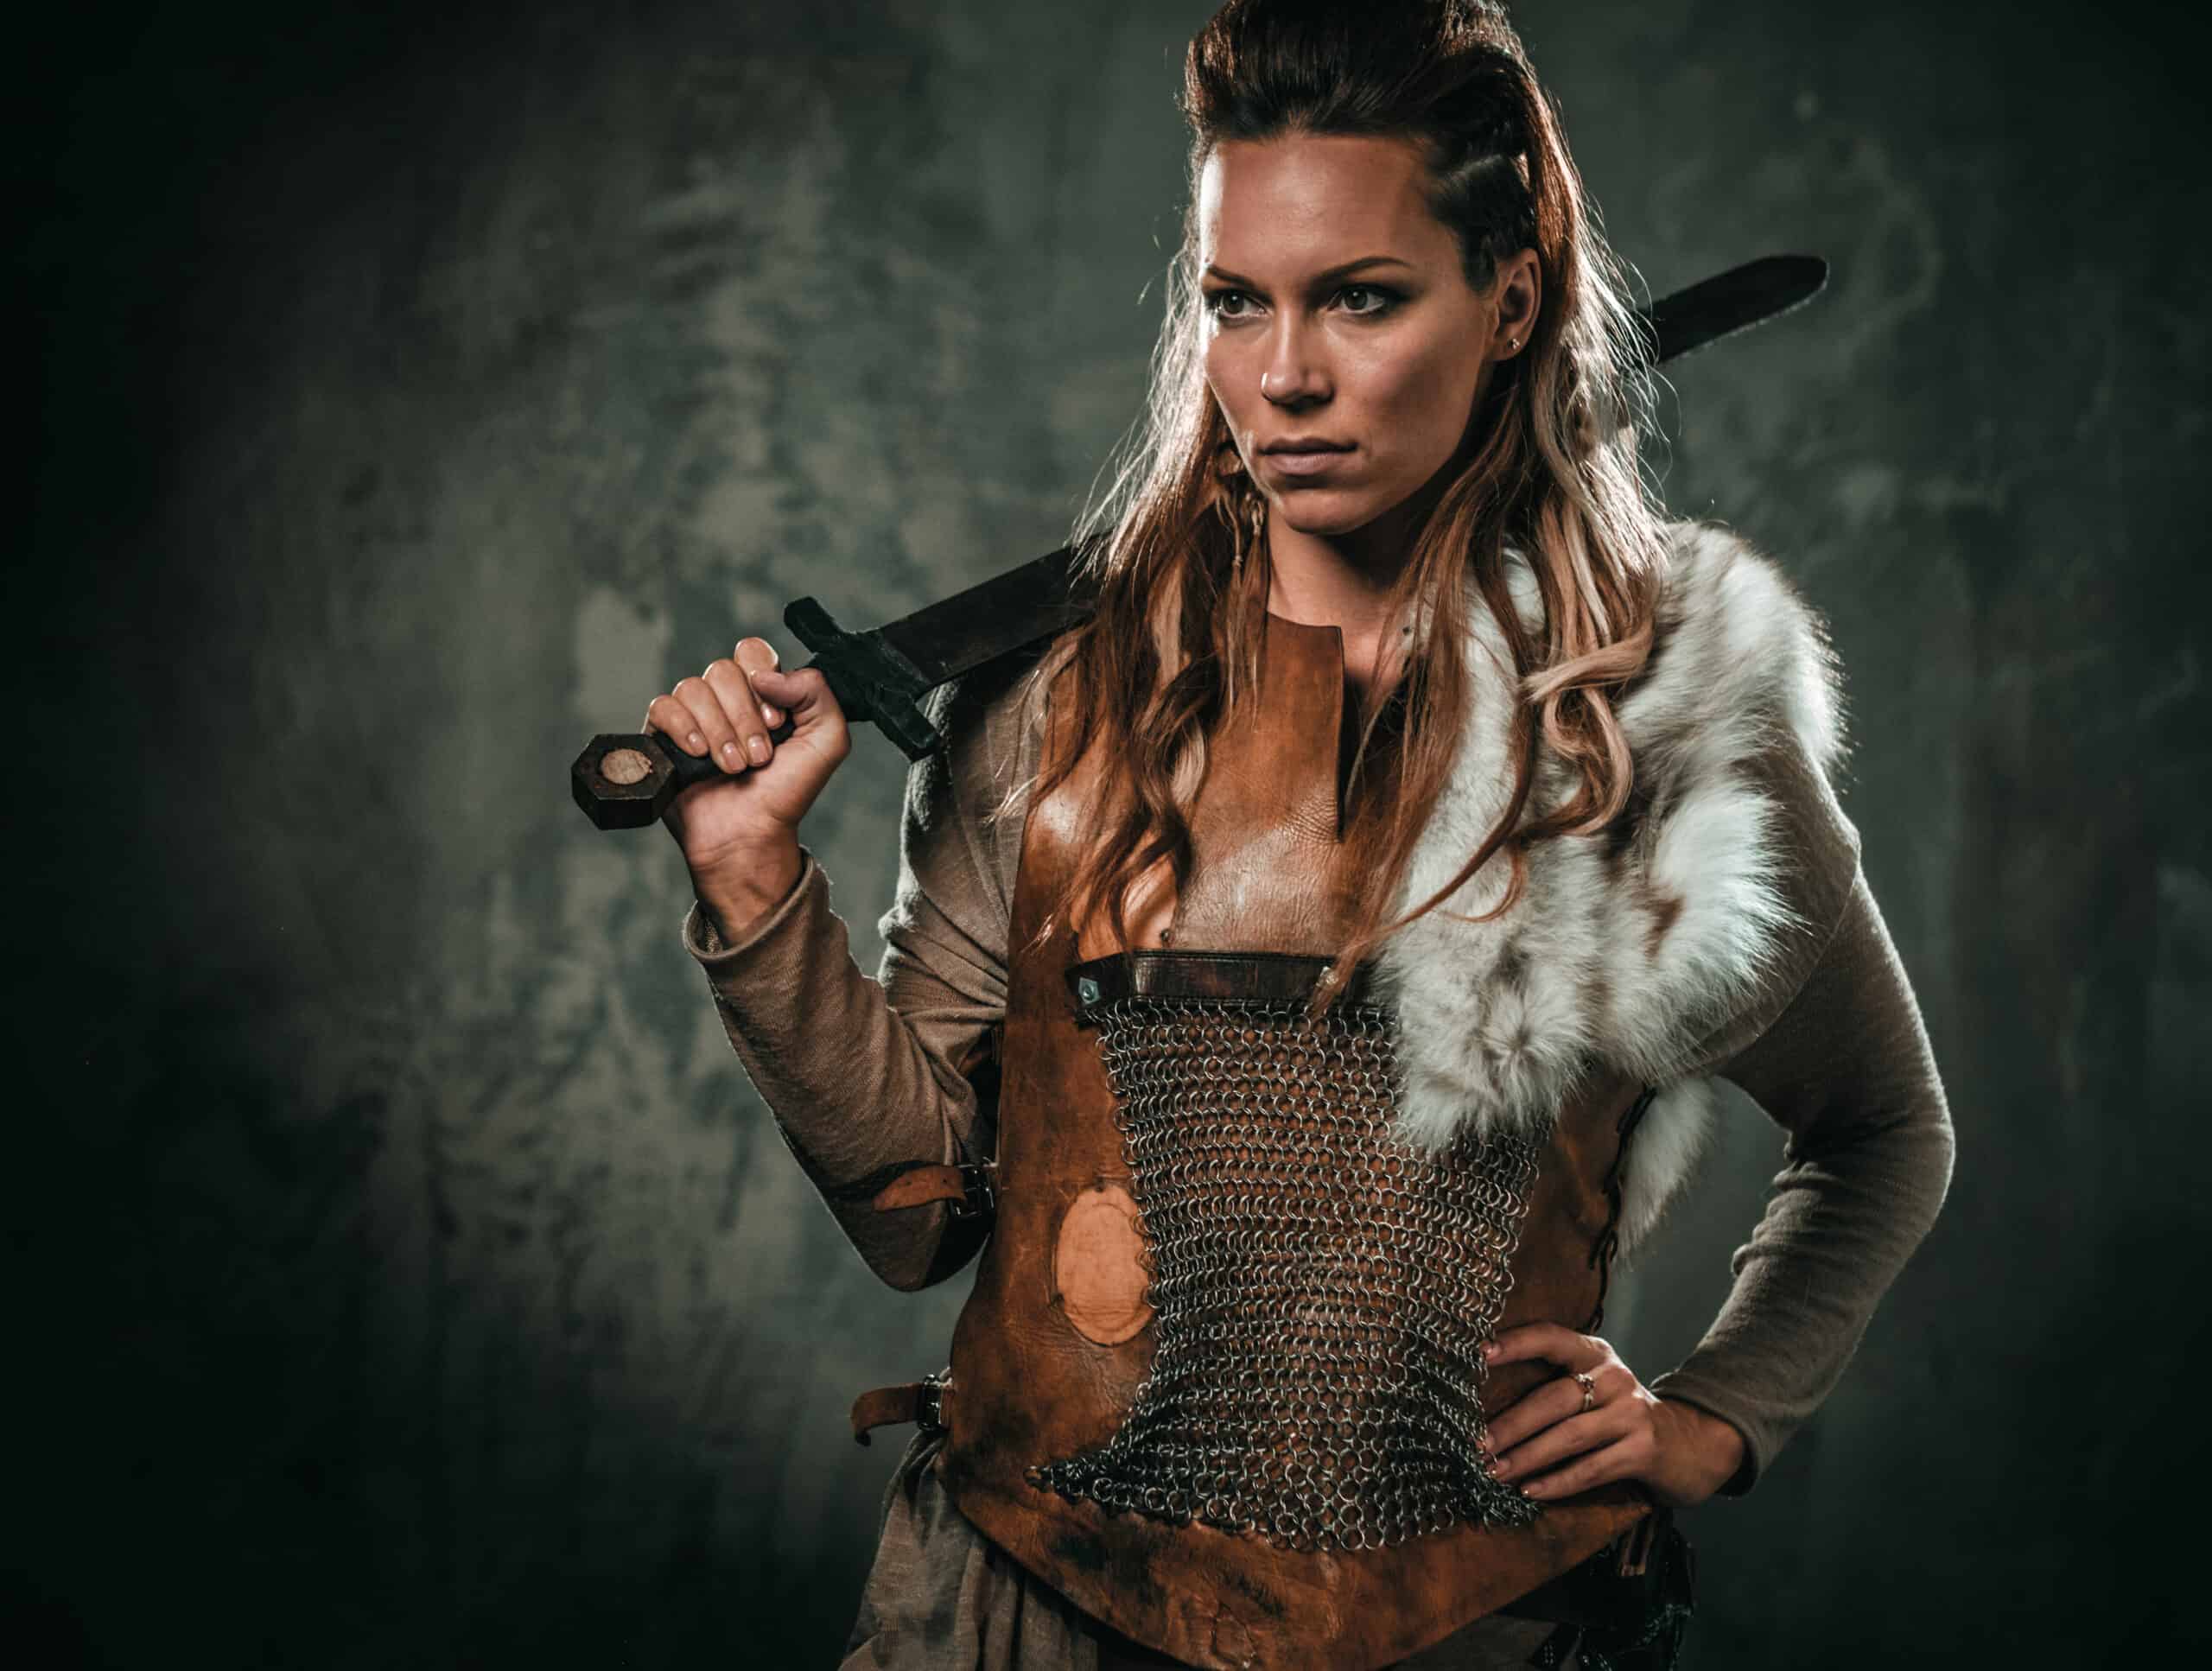 Shield Maiden holding a weapon